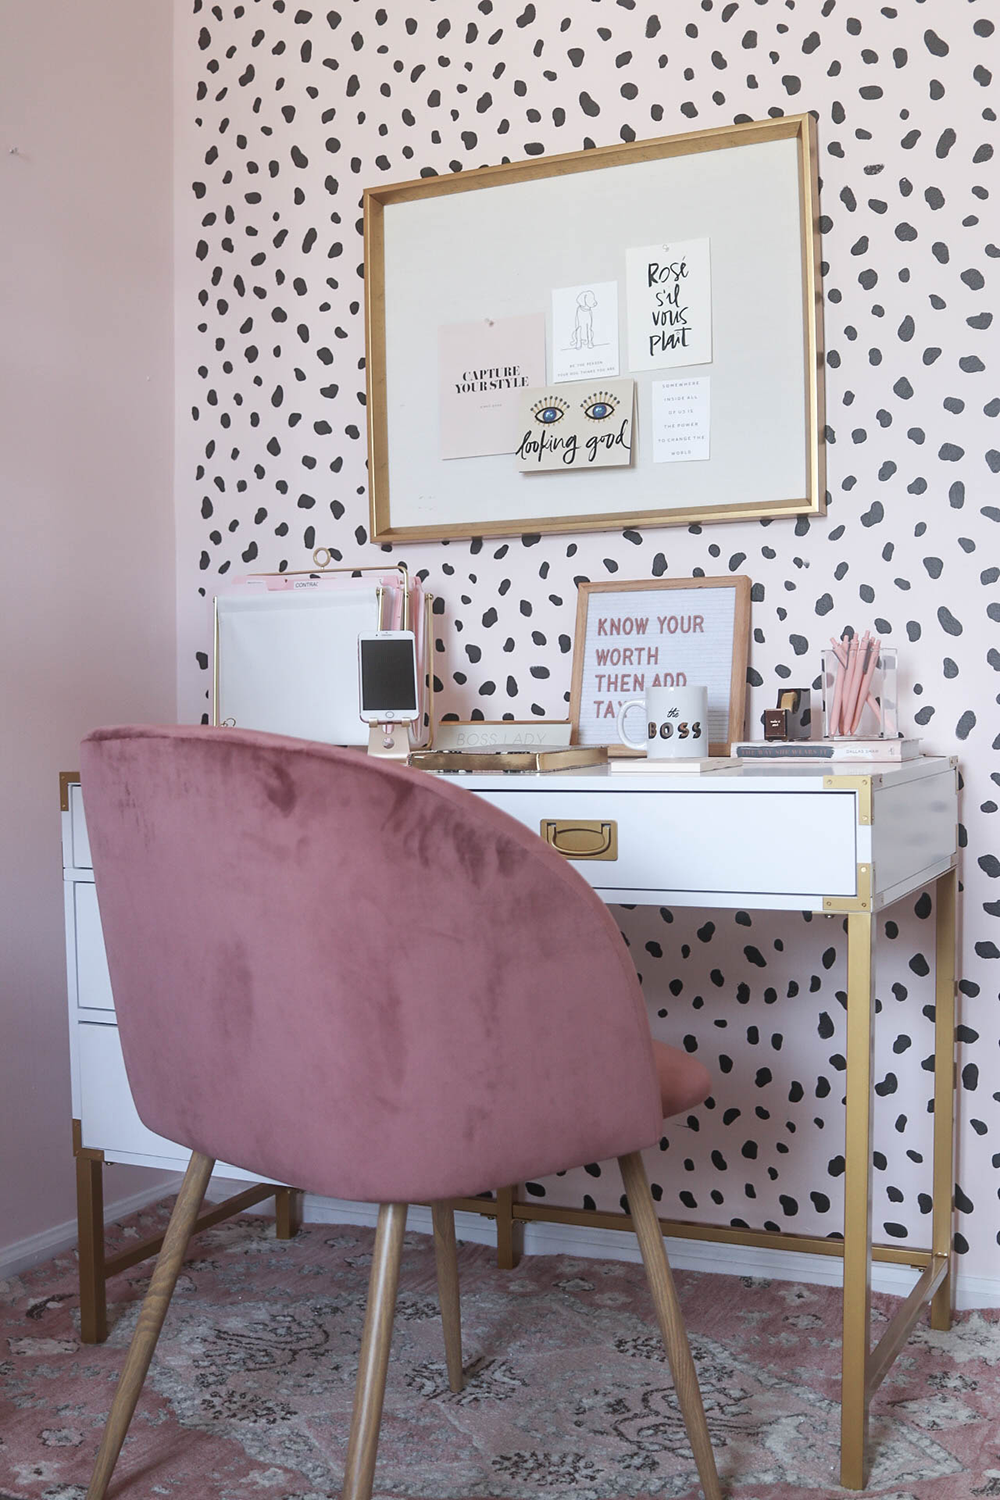 Blogger Office, Neutral Office, Blush Office, Blush Home Decor, Blush Blogger Office, Spotted Walls, Spotted Wall Stencil, Velvet Chair, Velvet Office Chair, White and Gold Desk, Campaign Desk